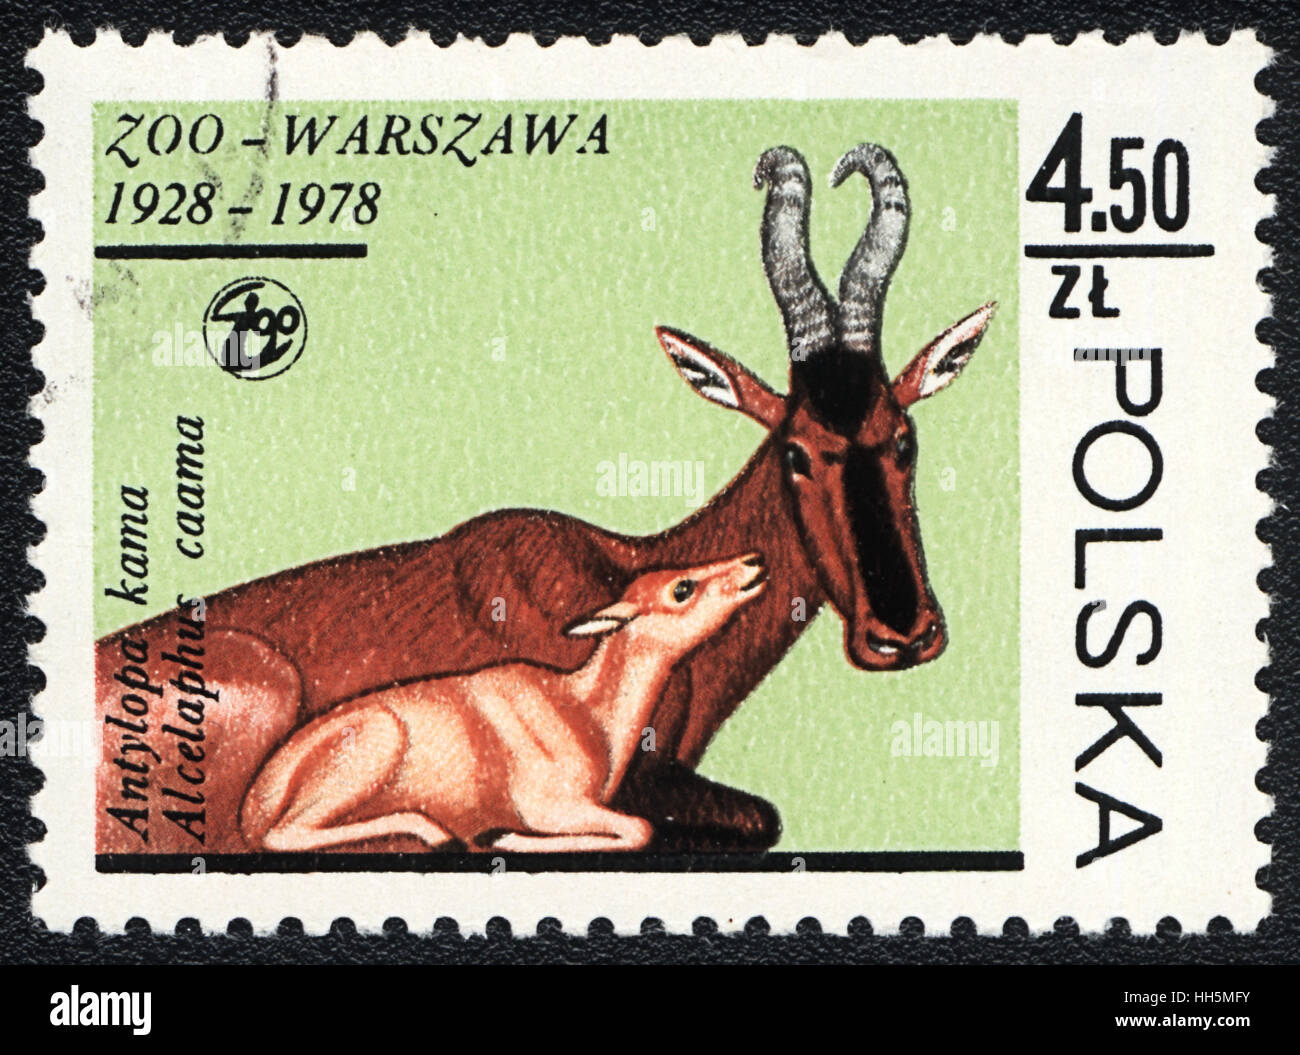 A postage stamp printed in Poland shows  a Alcelaphus caama, series Zoo Warsaw 1928-1978, 1978 Stock Photo